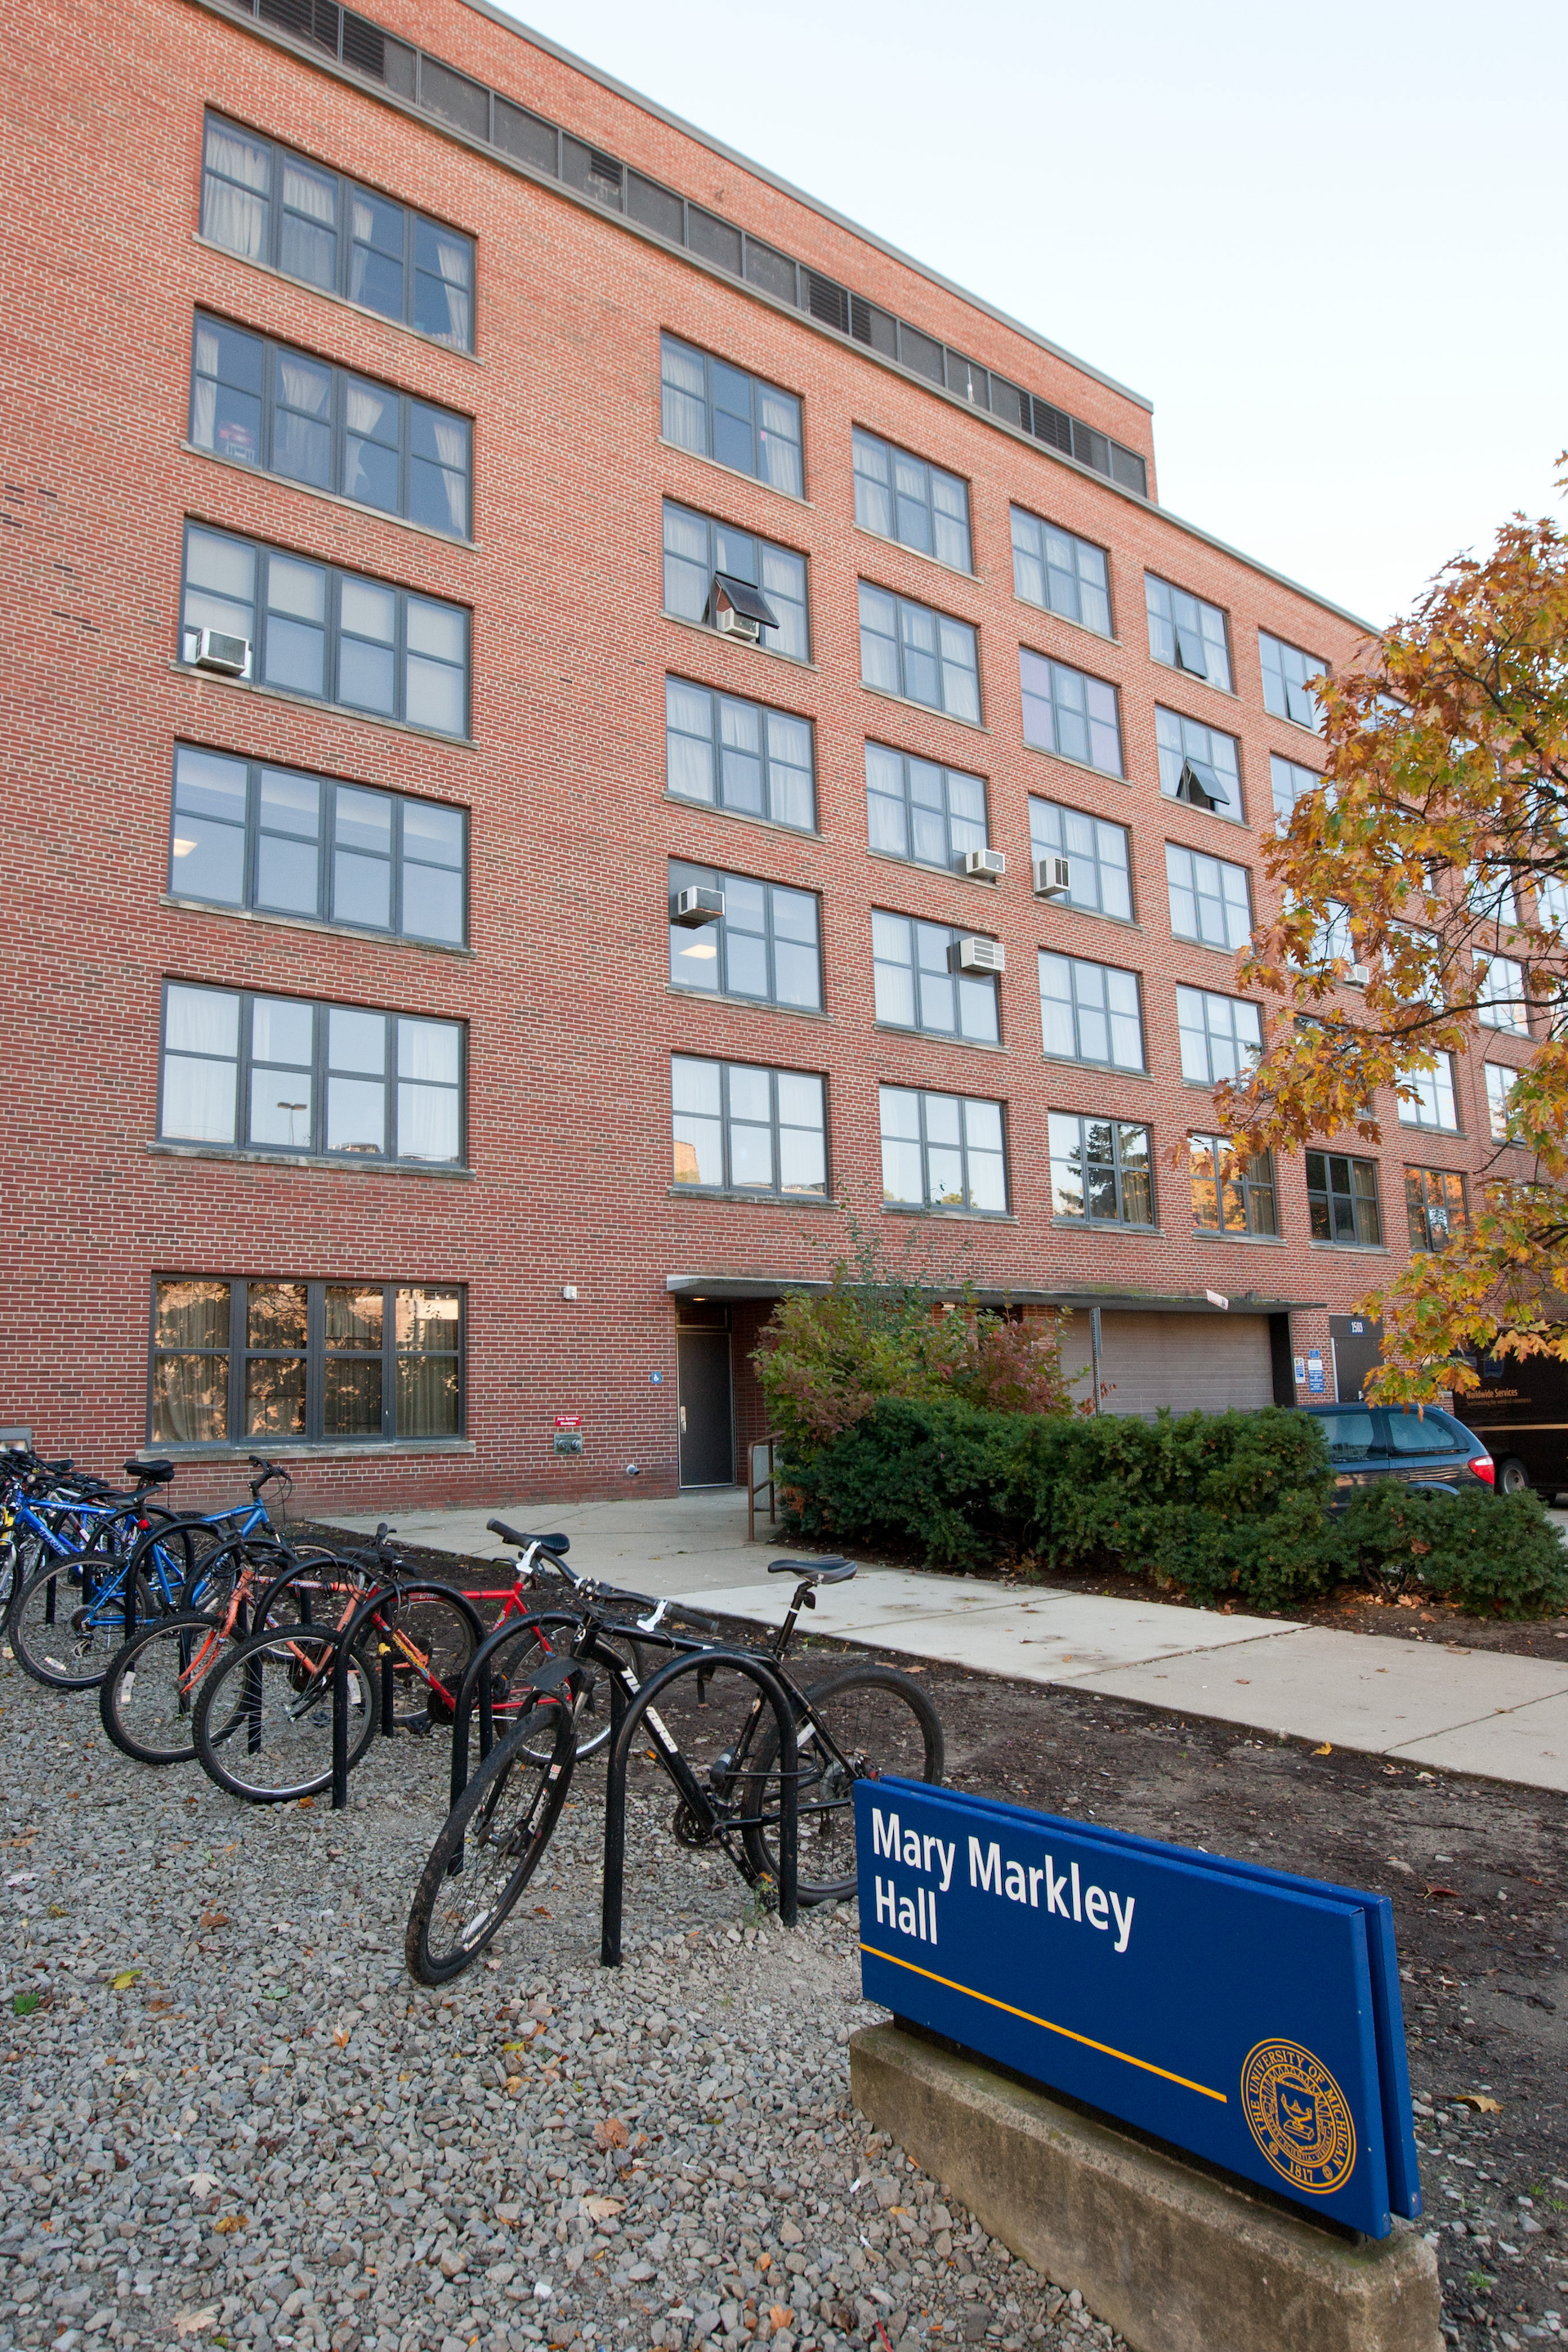 Front view of Markley Hall showing its campus sign and bike rack